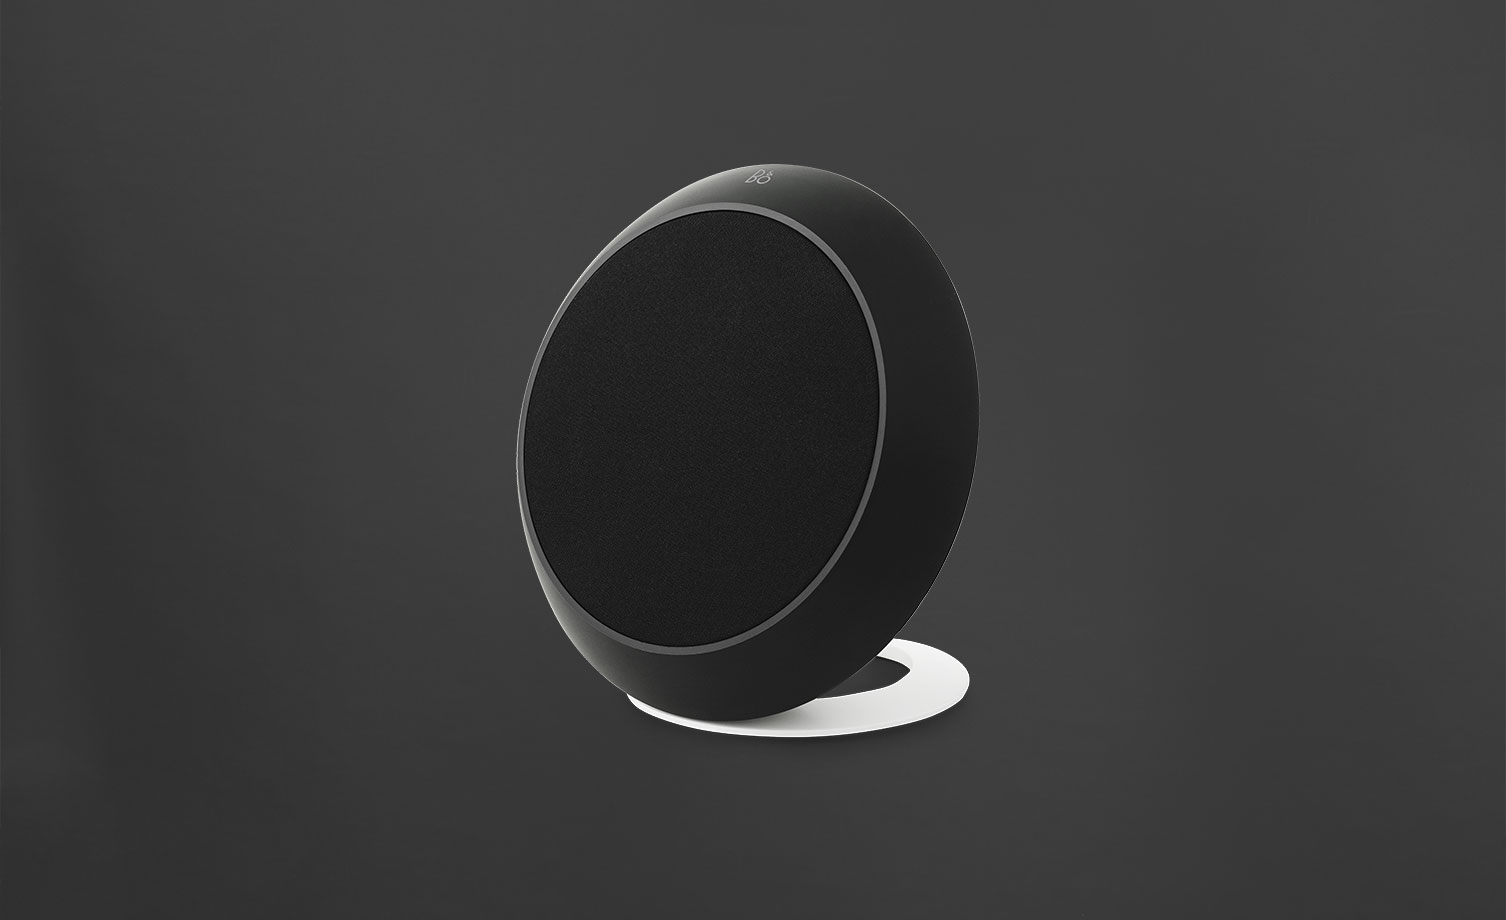 Bang & Olufsen BeoPlay S8 entry-level wireless speakers